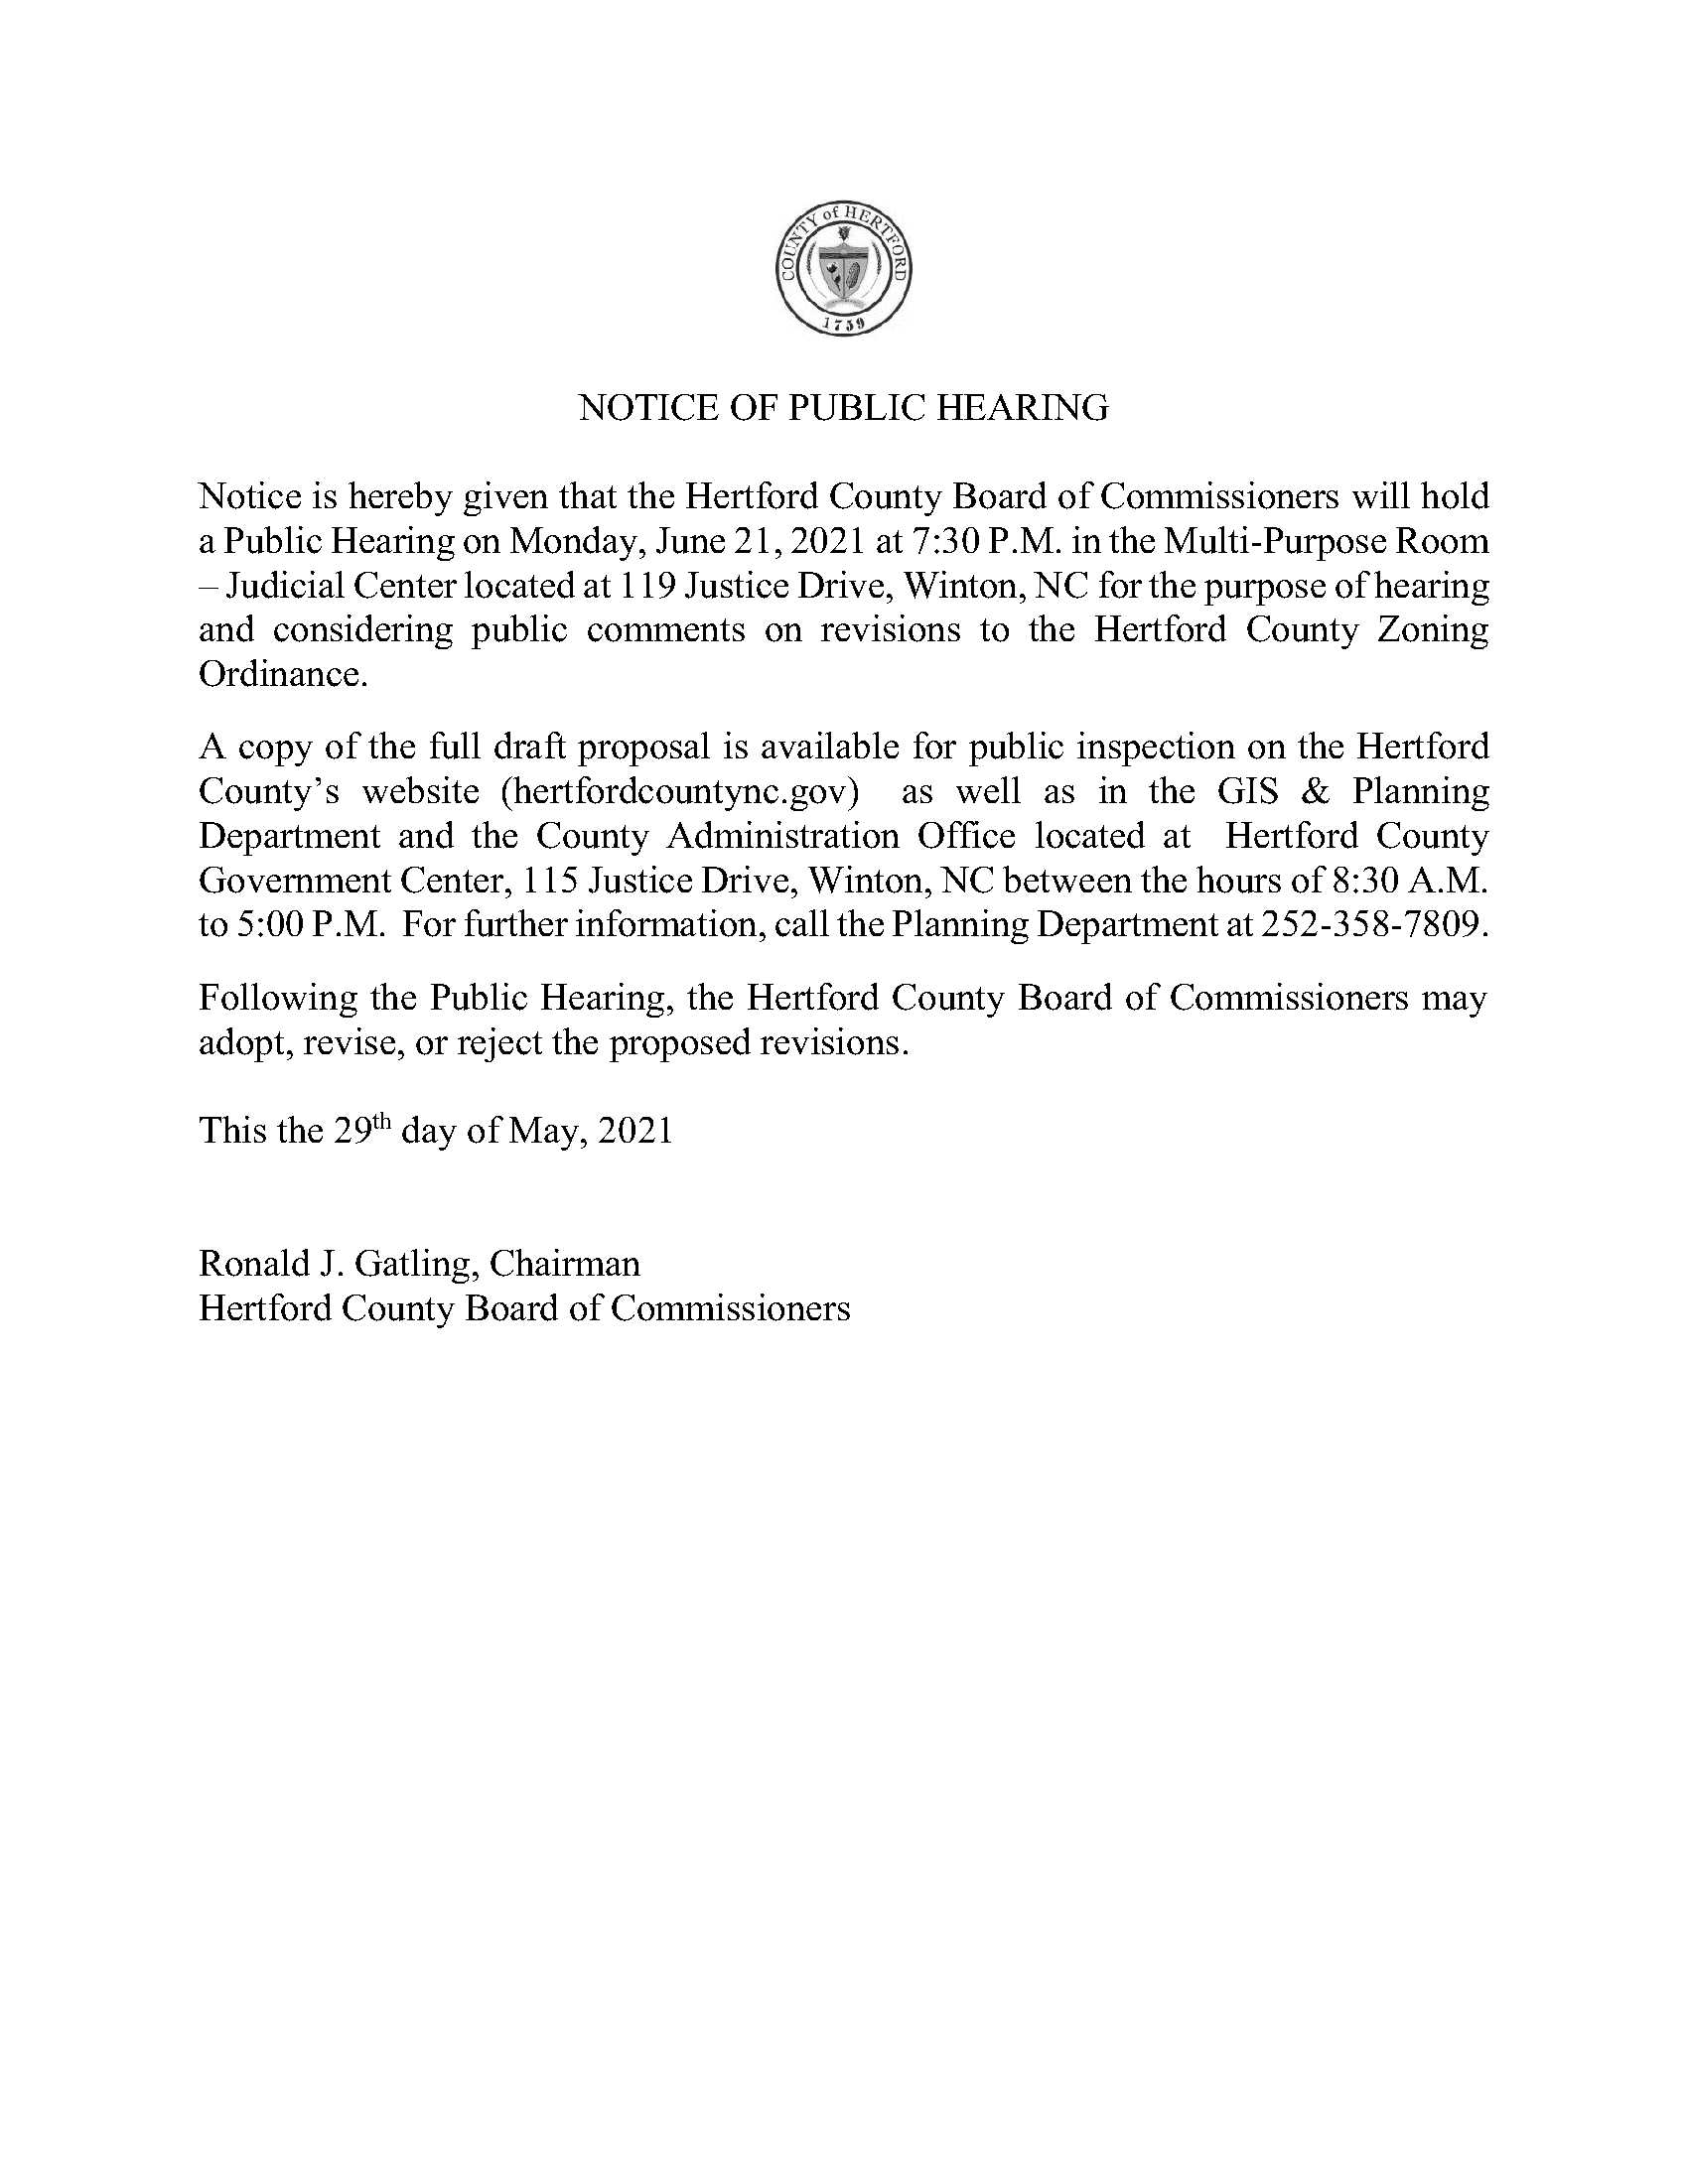 COMMISSIONERS-NOTICE OF PUBLIC HEARING-draft ordinance 05_2021 (002)